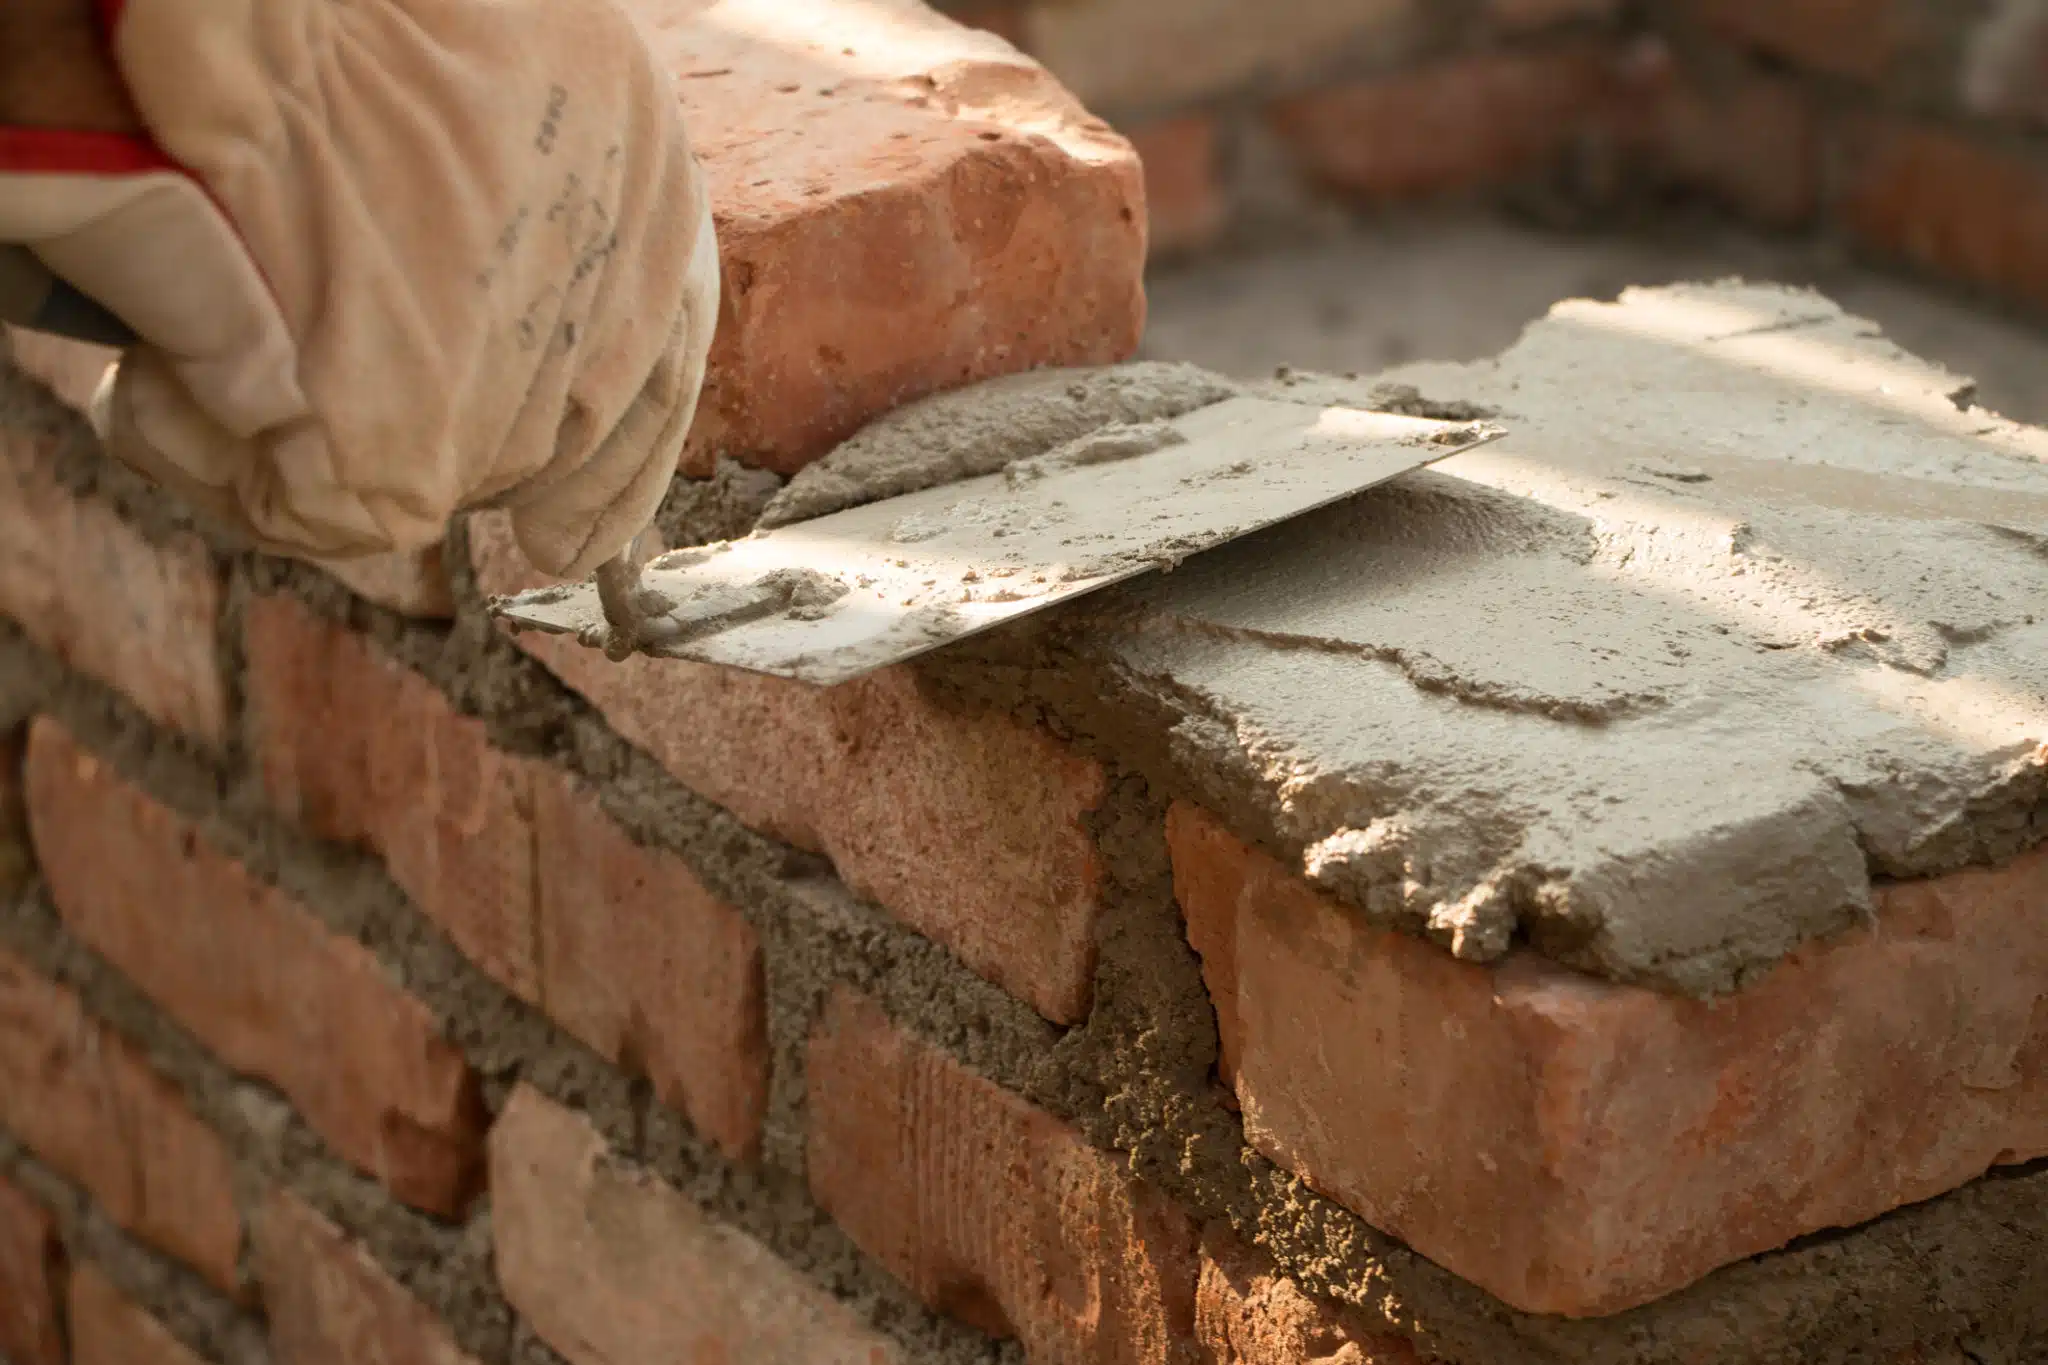 The image shows a close-up view of a masonry project It depicts several bricks and mortar with a trowel being used to apply the mortar between the bricks The bricks appear to be a reddish-brown color and the mortar is a greyish-white The texture and details of the bricks and mortar are clearly visible showcasing the craftsmanship involved in masonry work